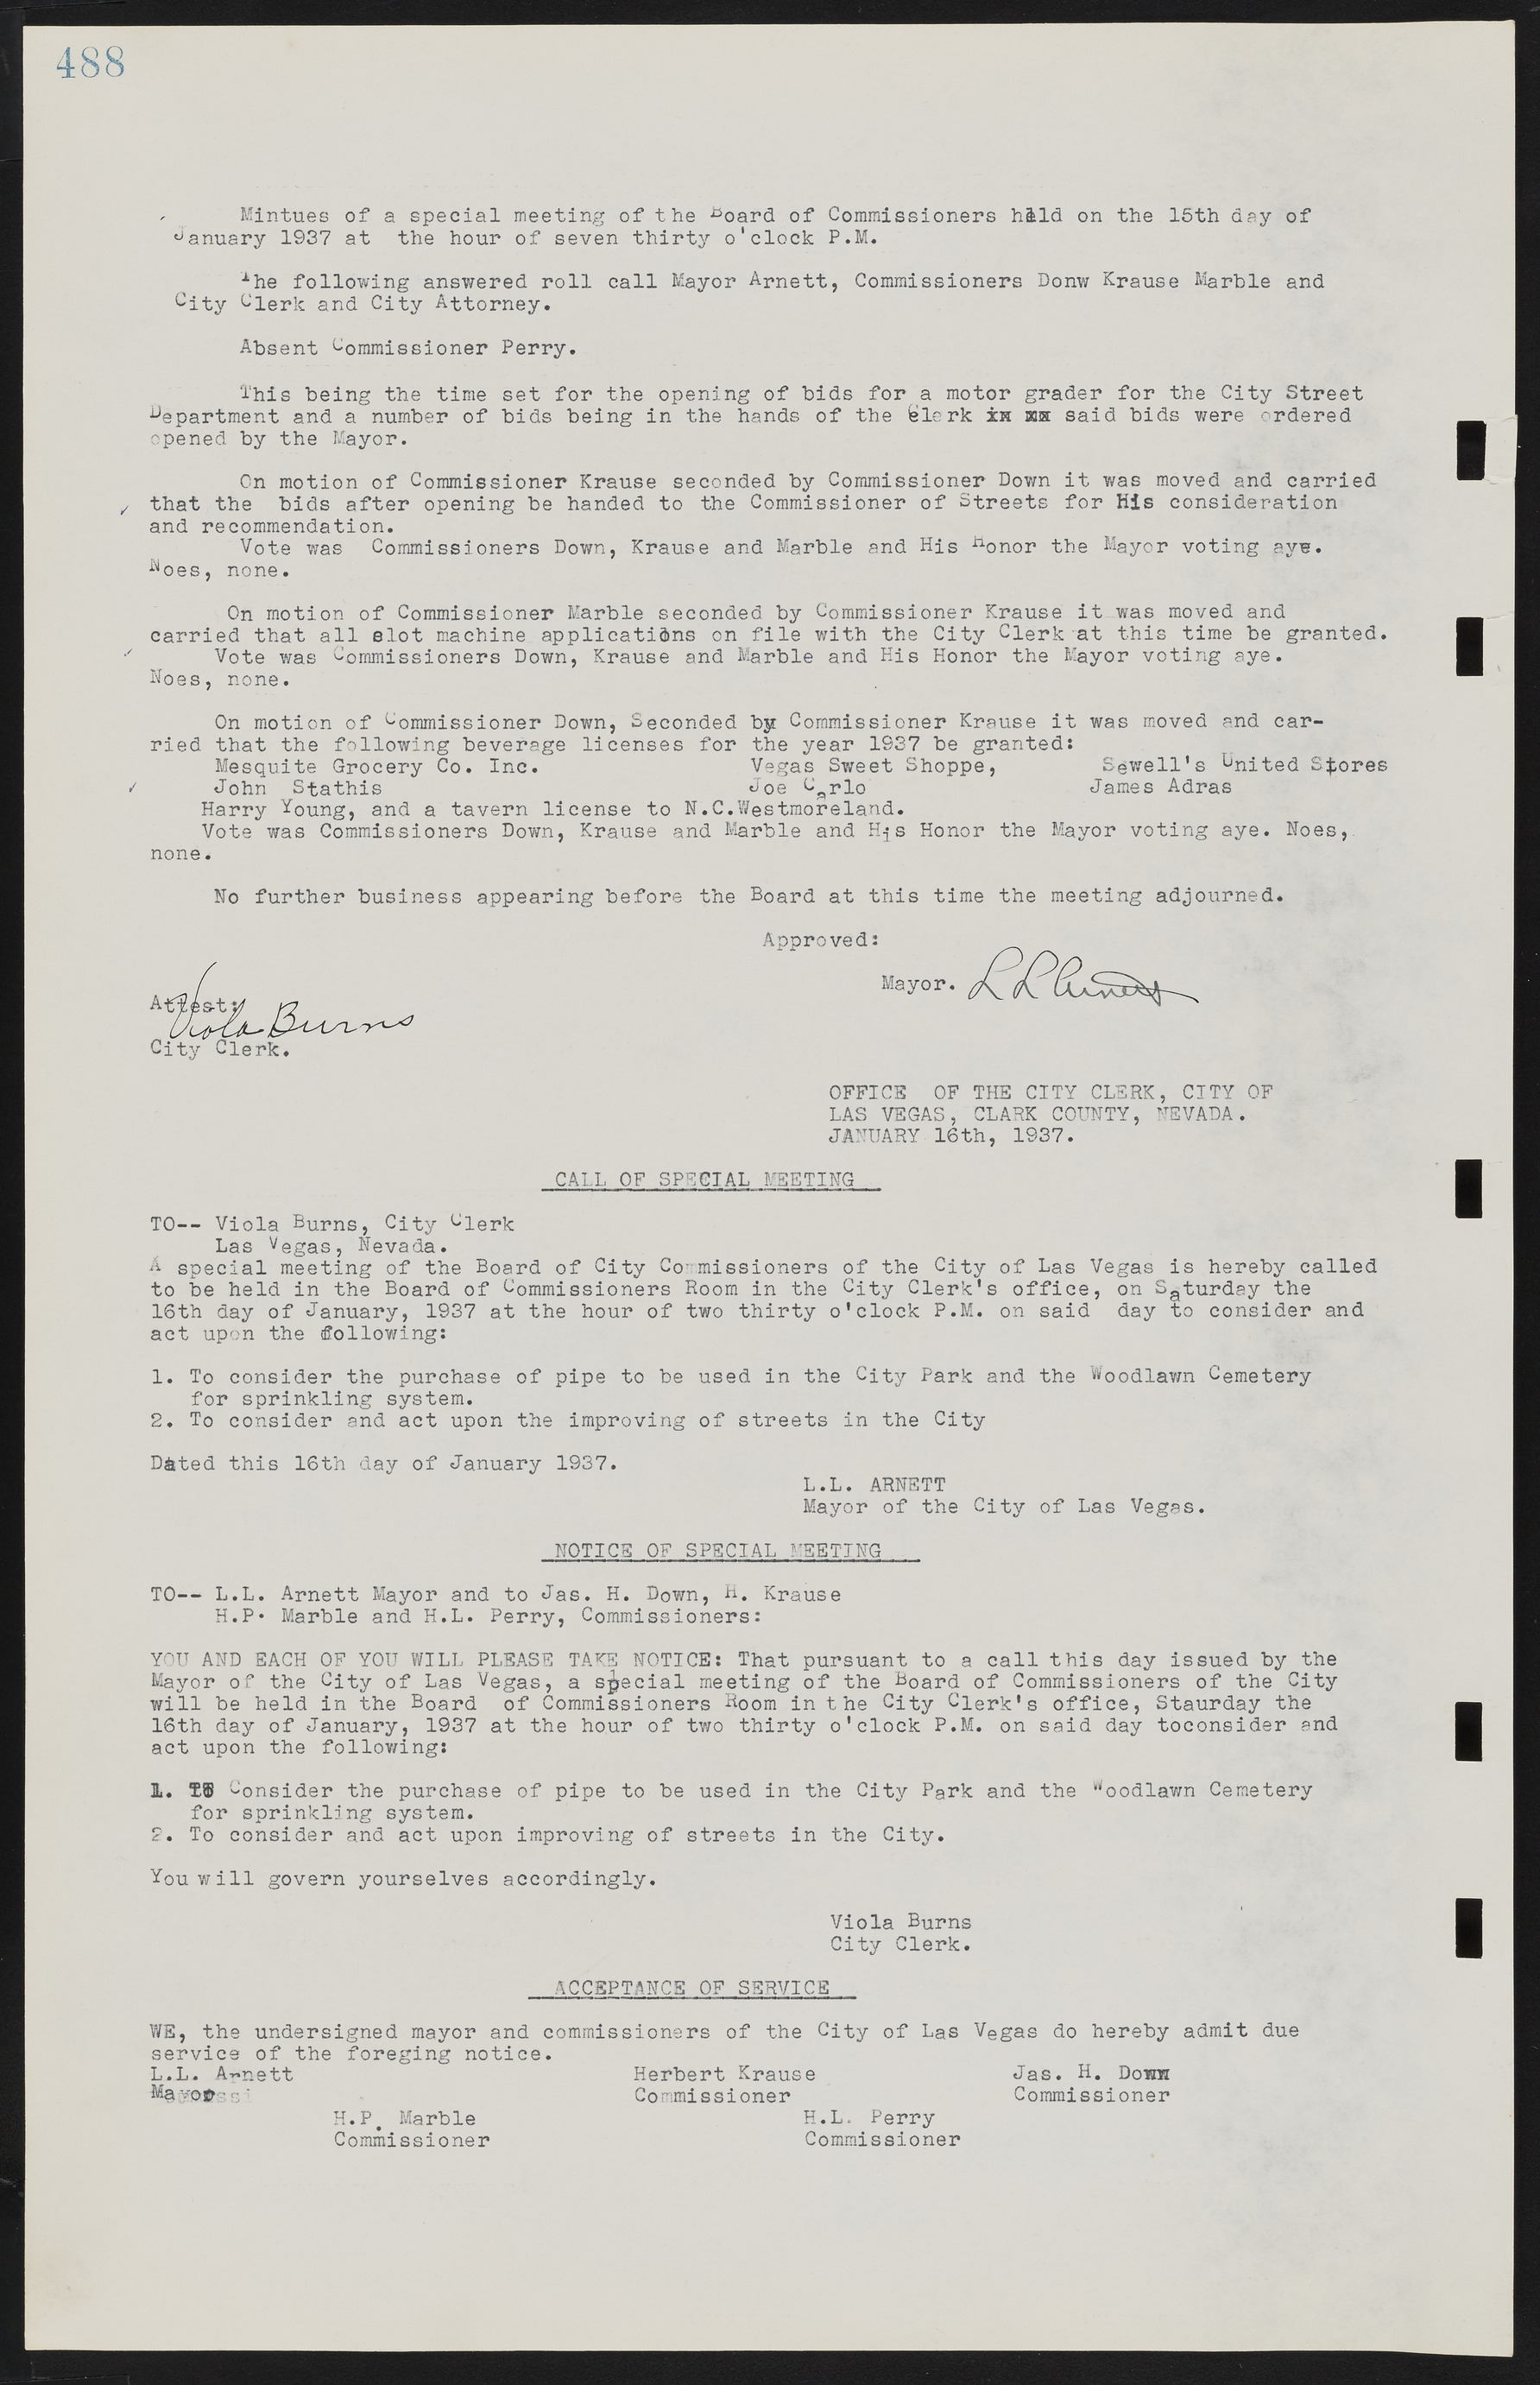 Las Vegas City Commission Minutes, May 14, 1929 to February 11, 1937, lvc000003-495